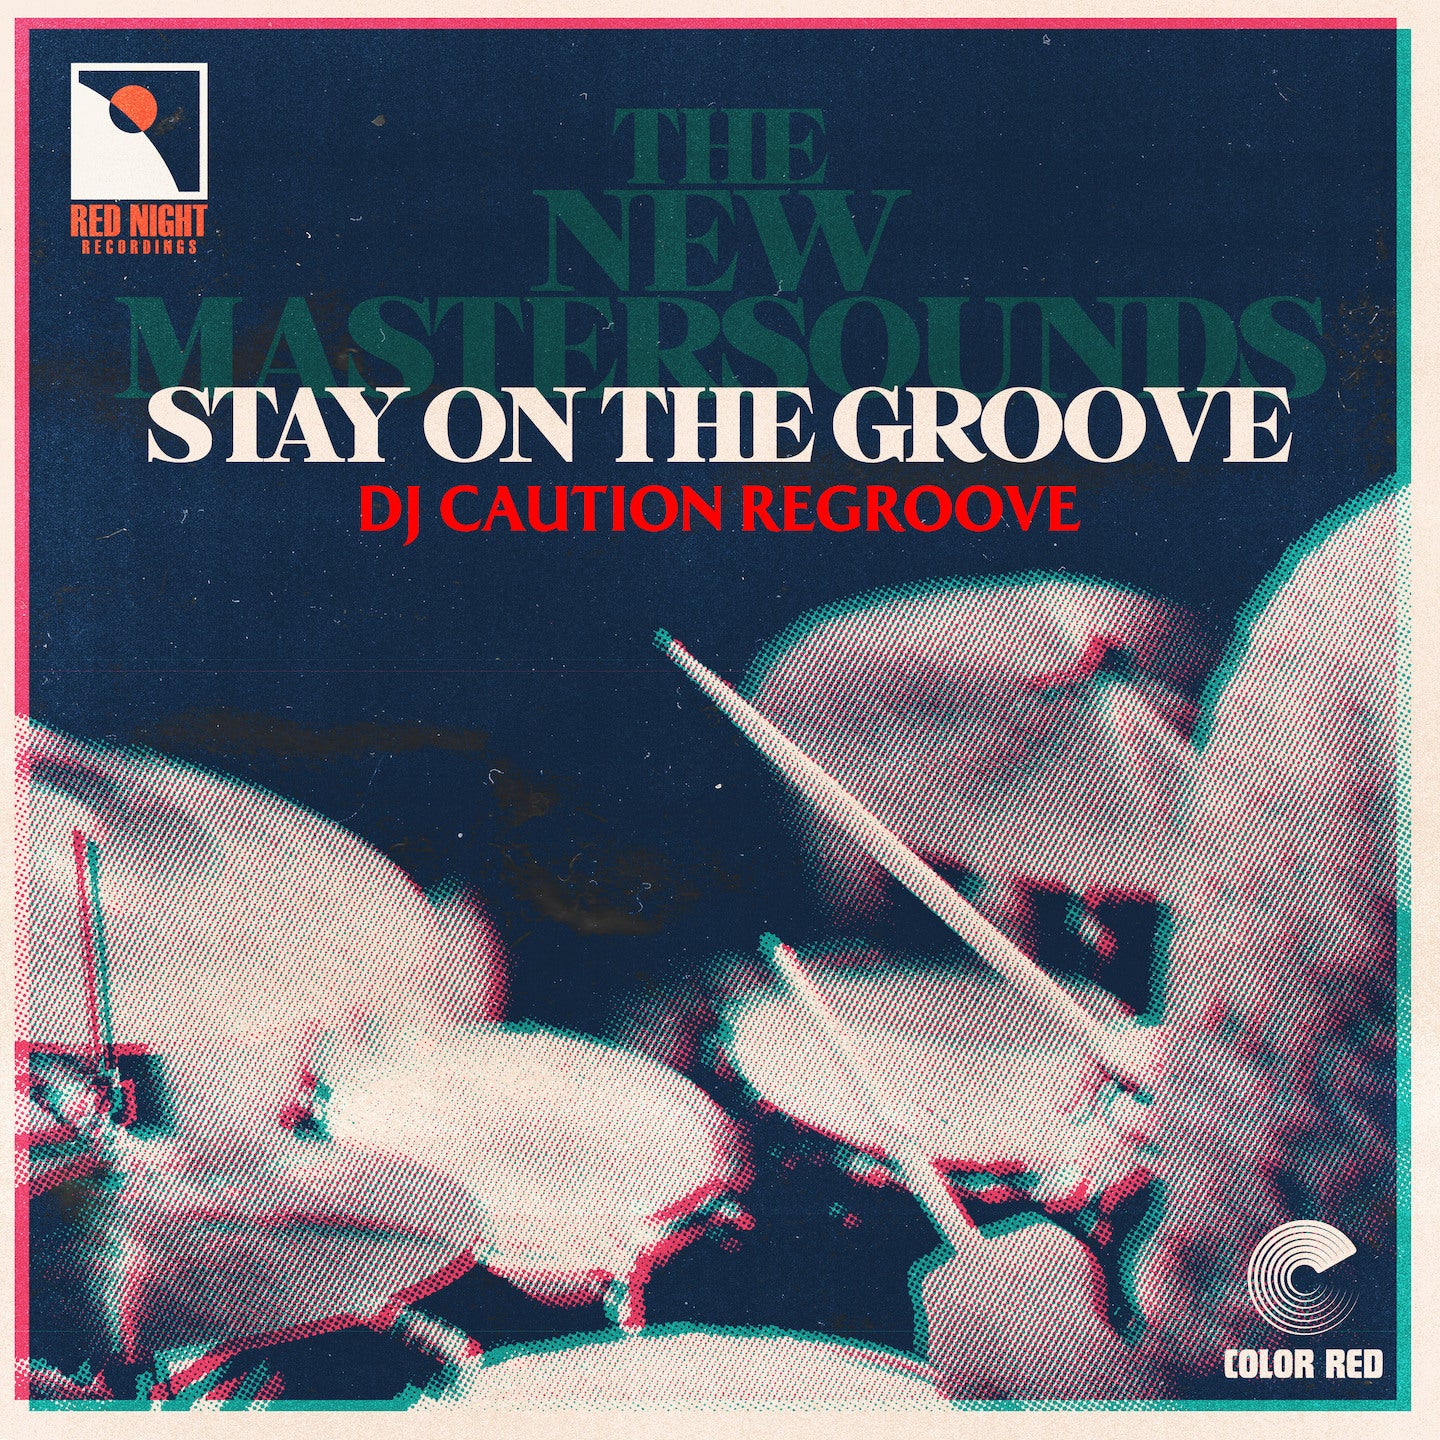 Stay on the Groove (DJ Caution Regroove)